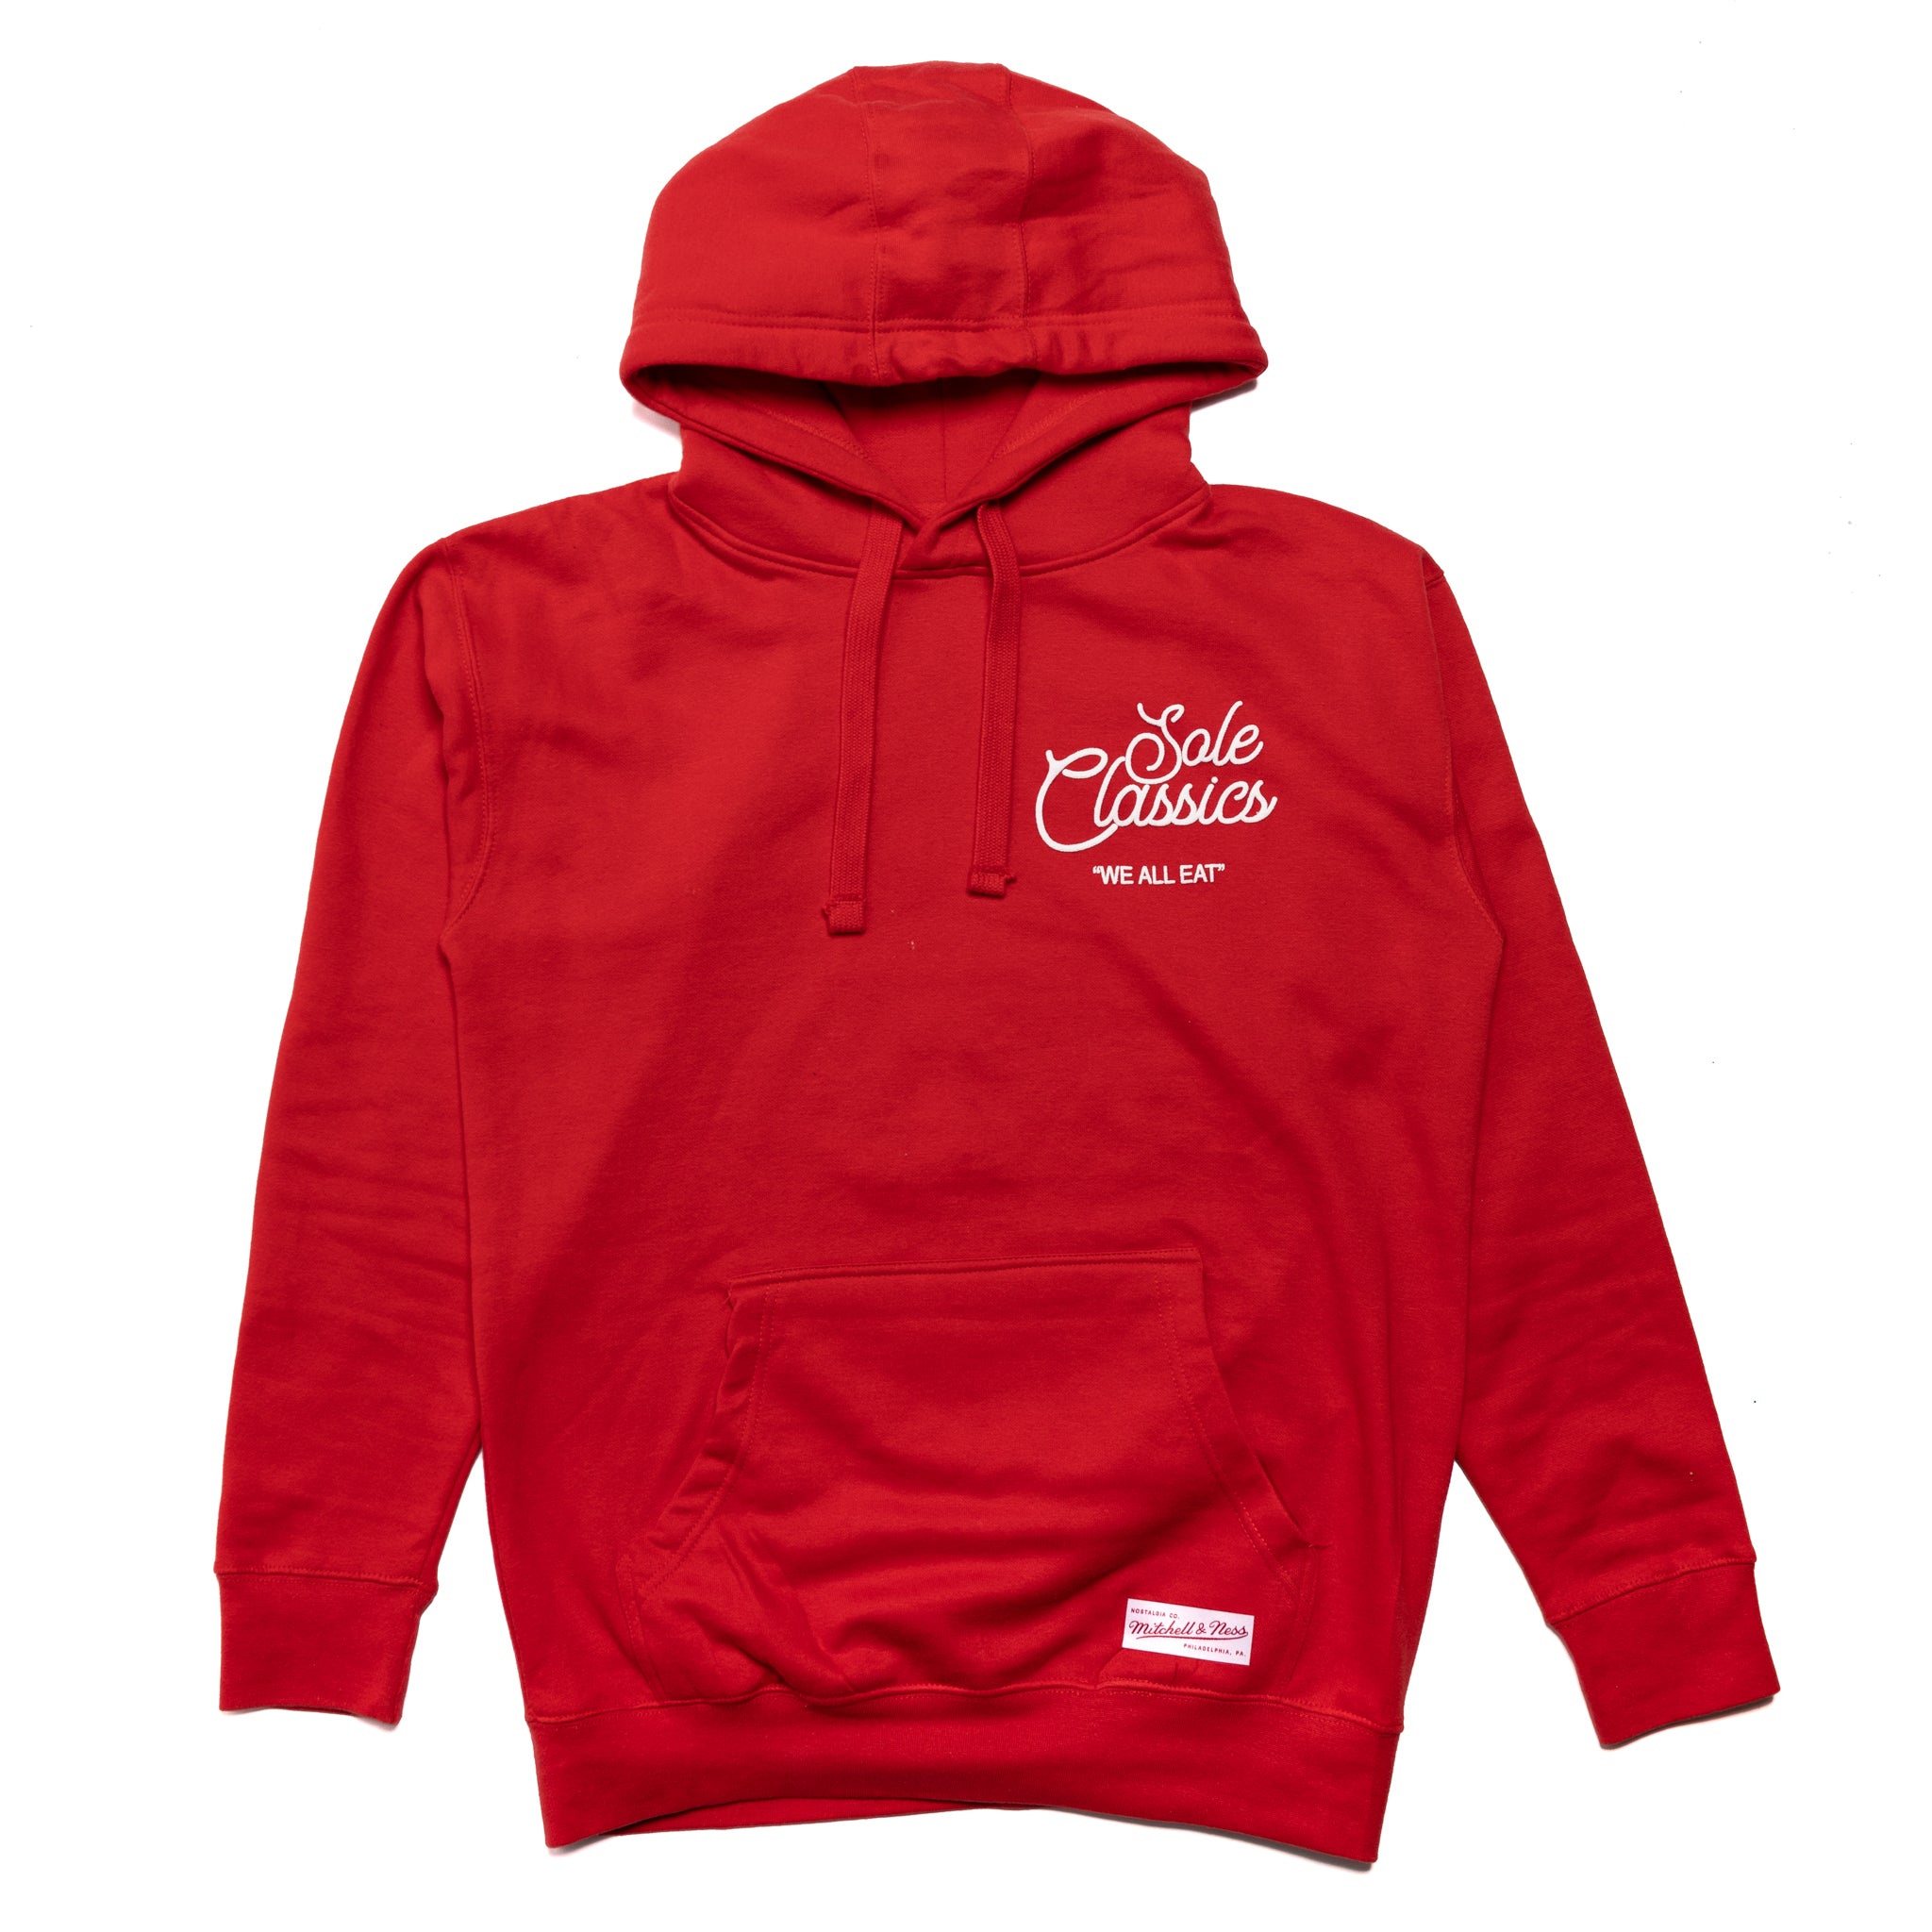 Sole Classics x Mitchell & Ness We All Eat Hoodie 'Red'